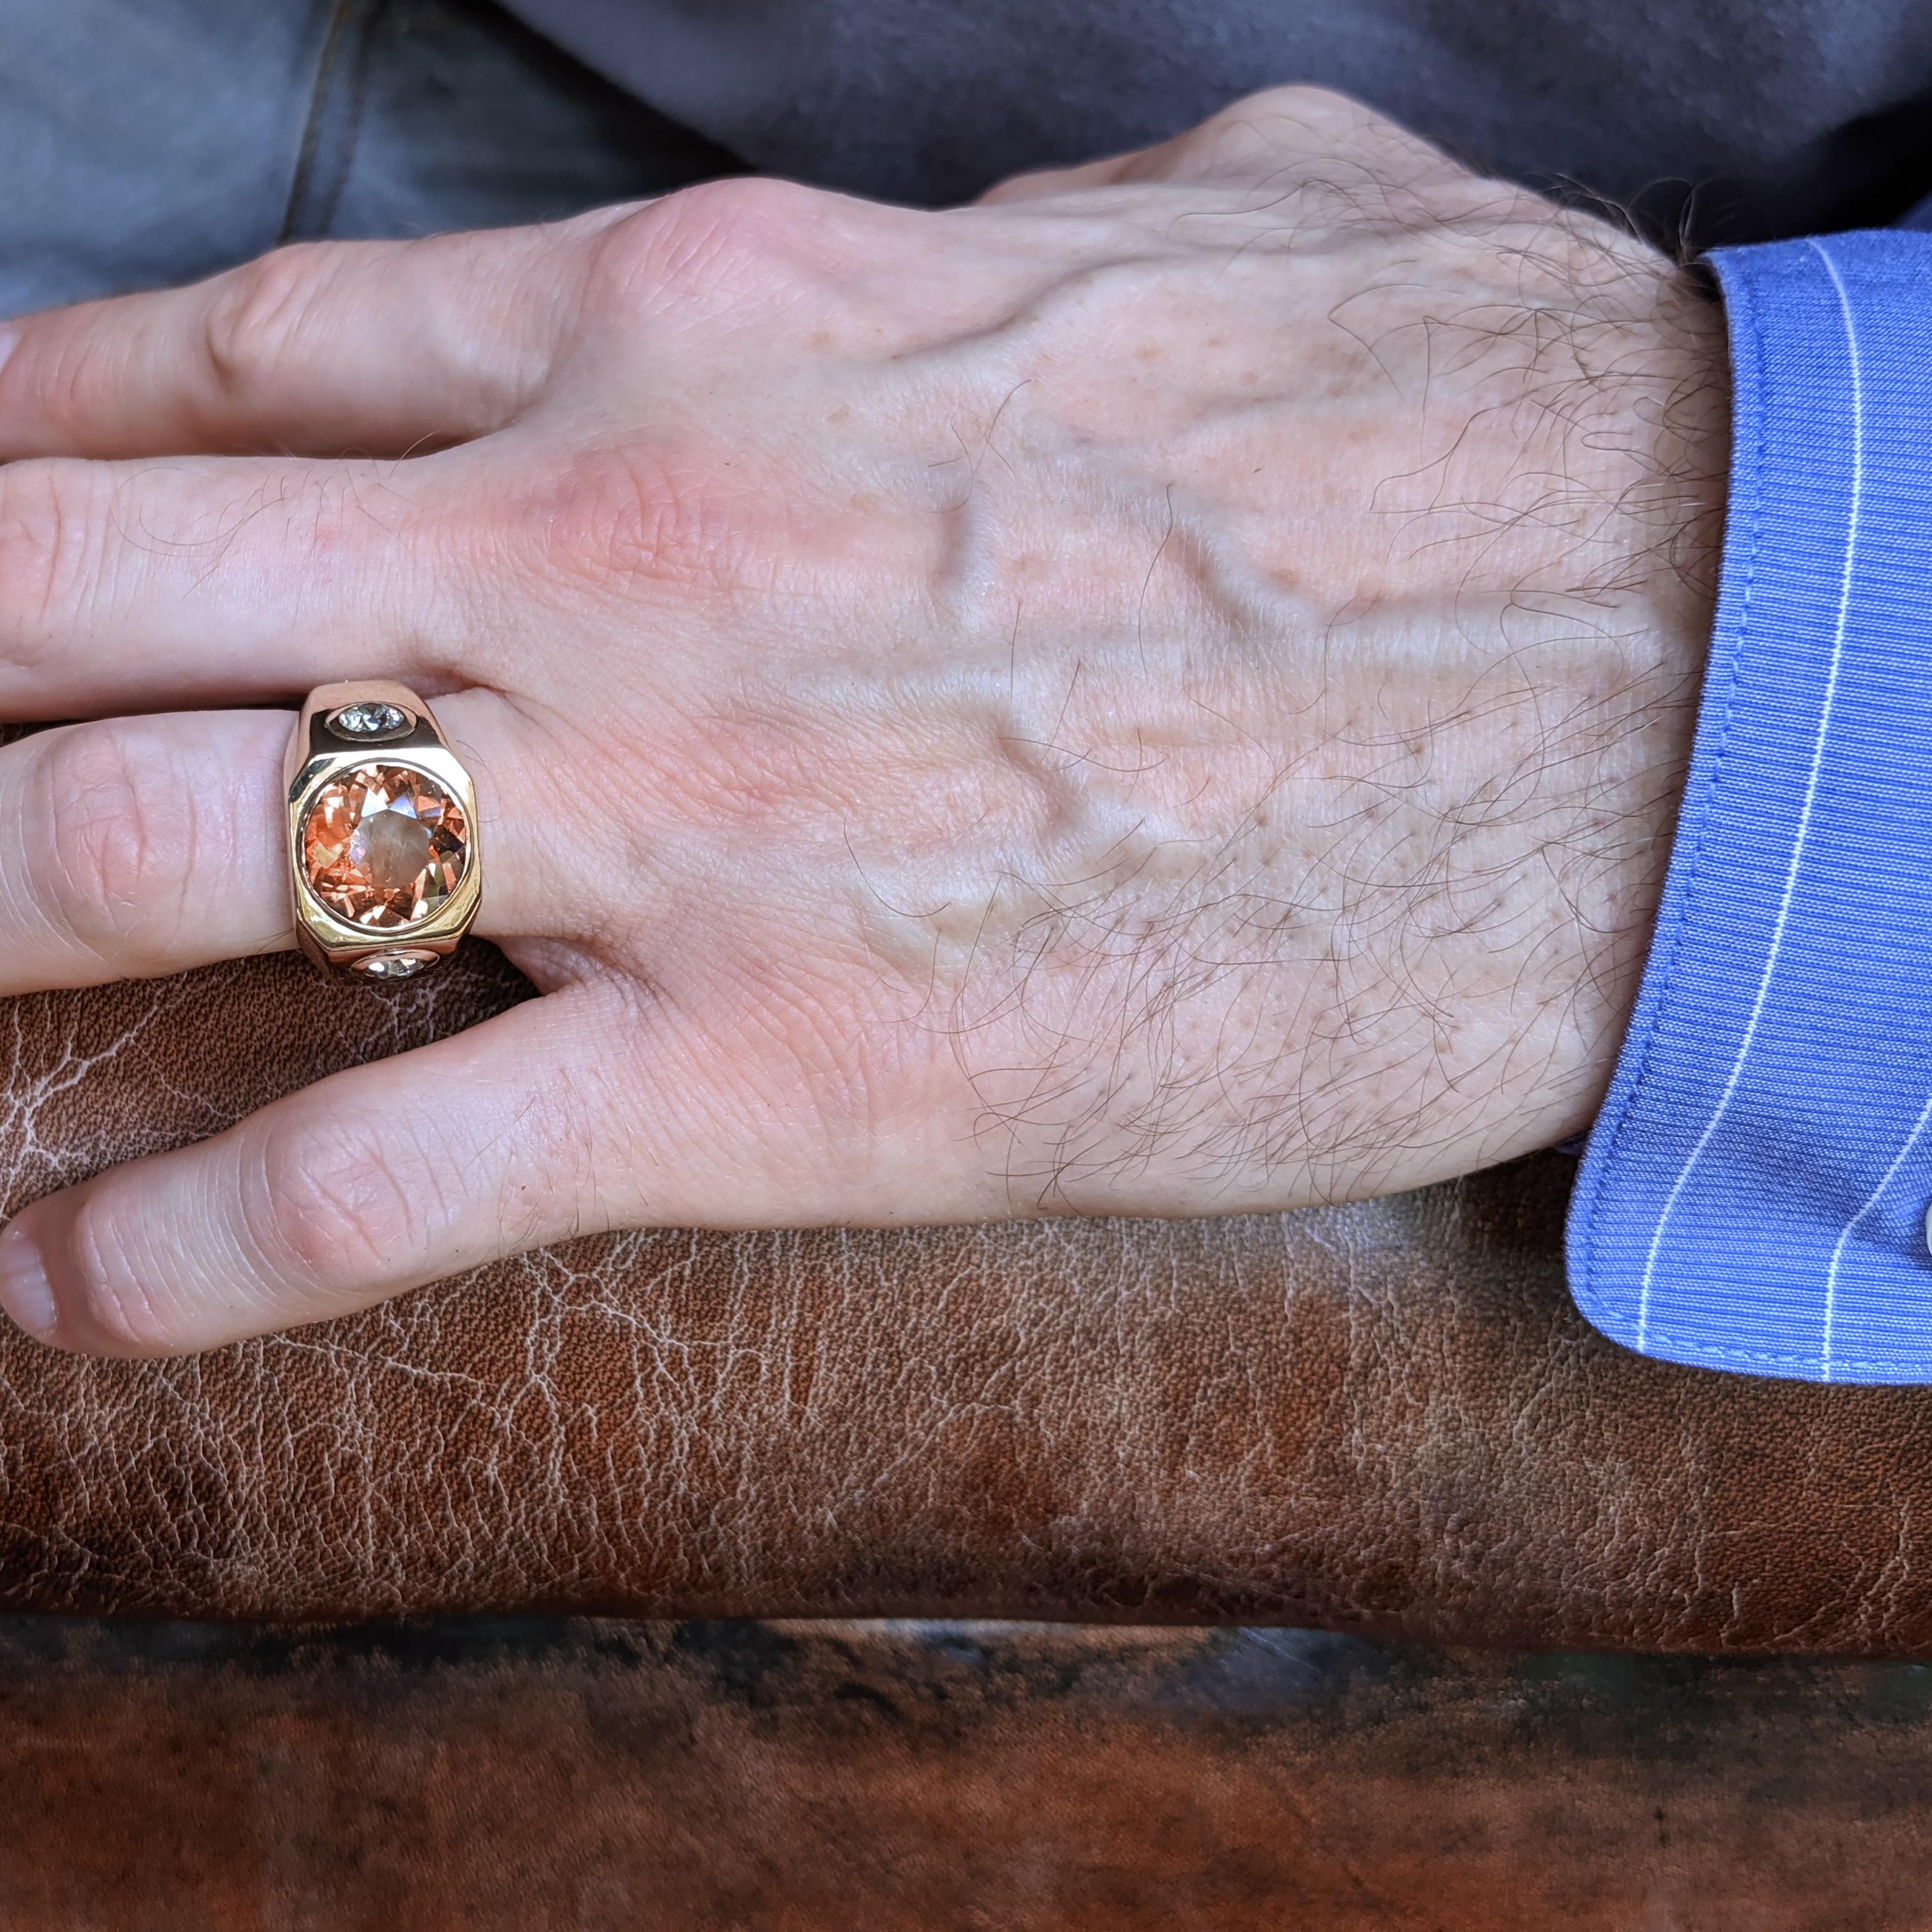 Men's Precious Topaz Ring in Whiskey is Ruggedly Handsome 7